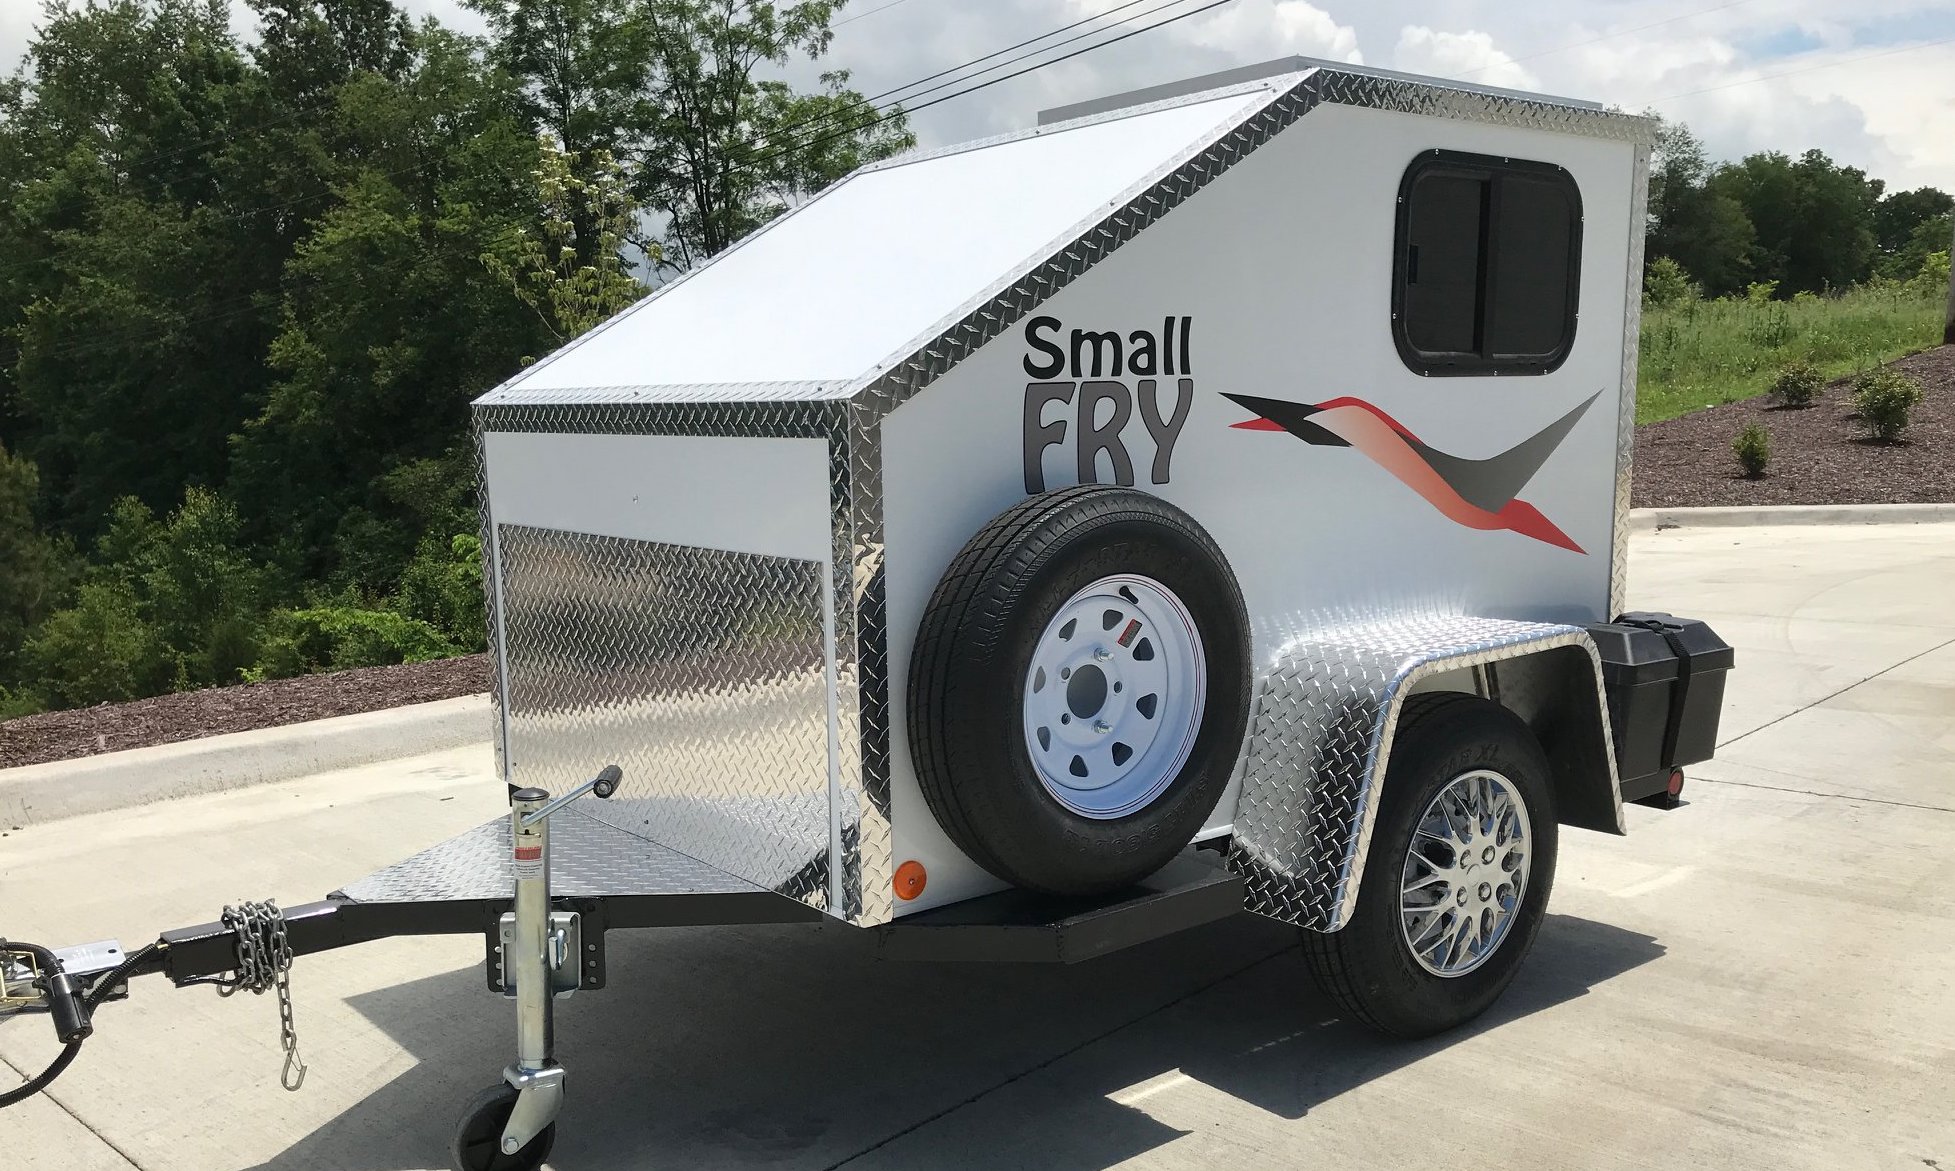 Small Fry Travel Trailer Lets You Explore The World With Nothing But A